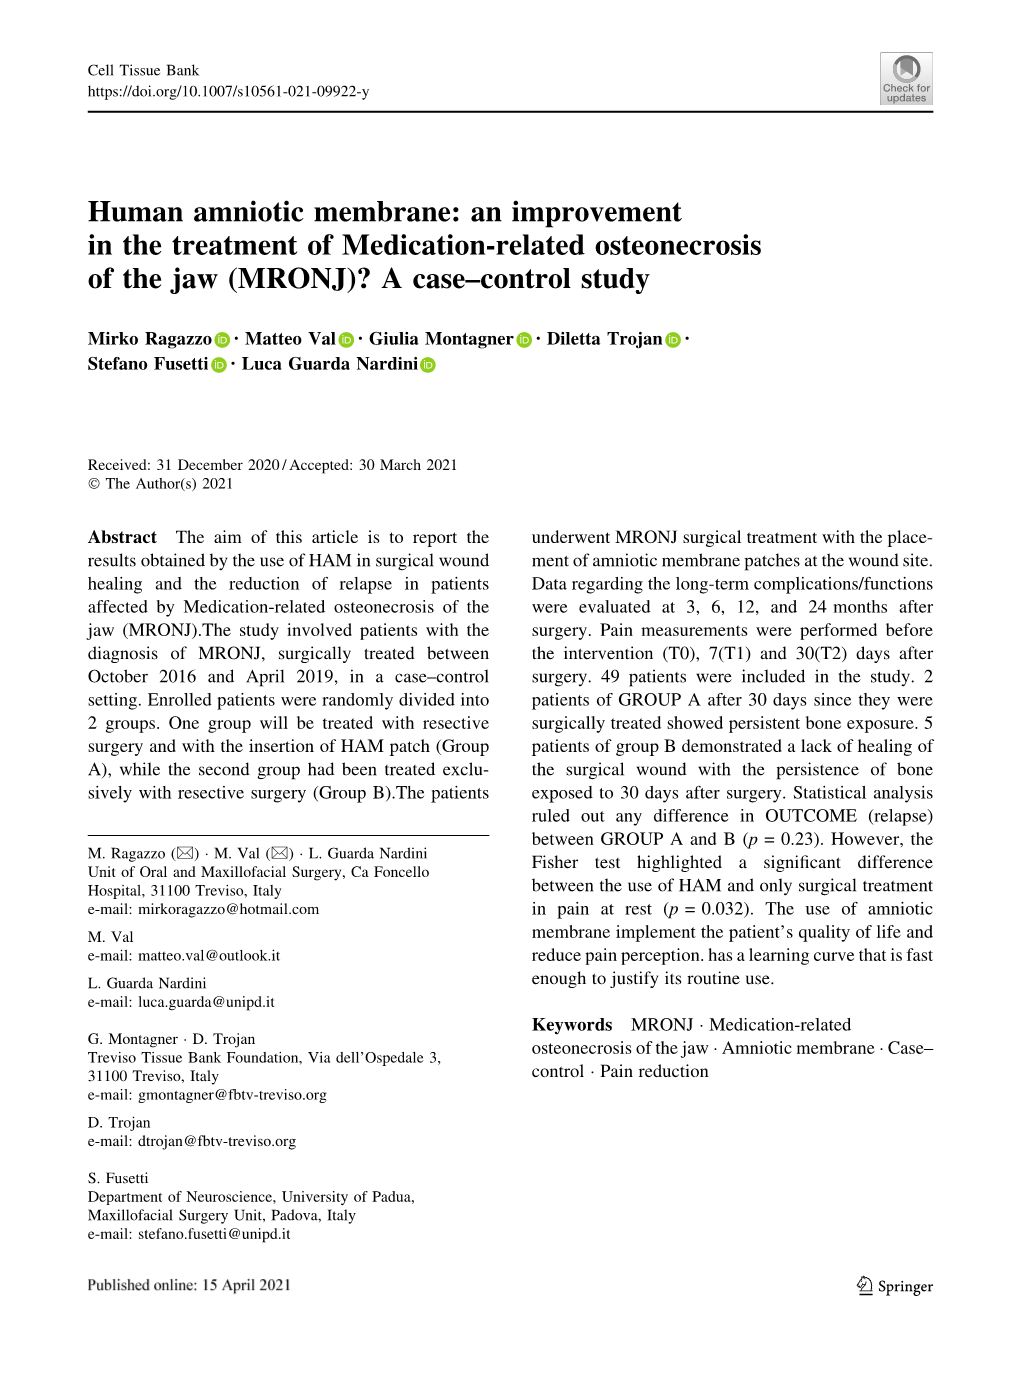 Human Amniotic Membrane: an Improvement in the Treatment of Medication-Related Osteonecrosis of the Jaw (MRONJ)? a Case–Control Study